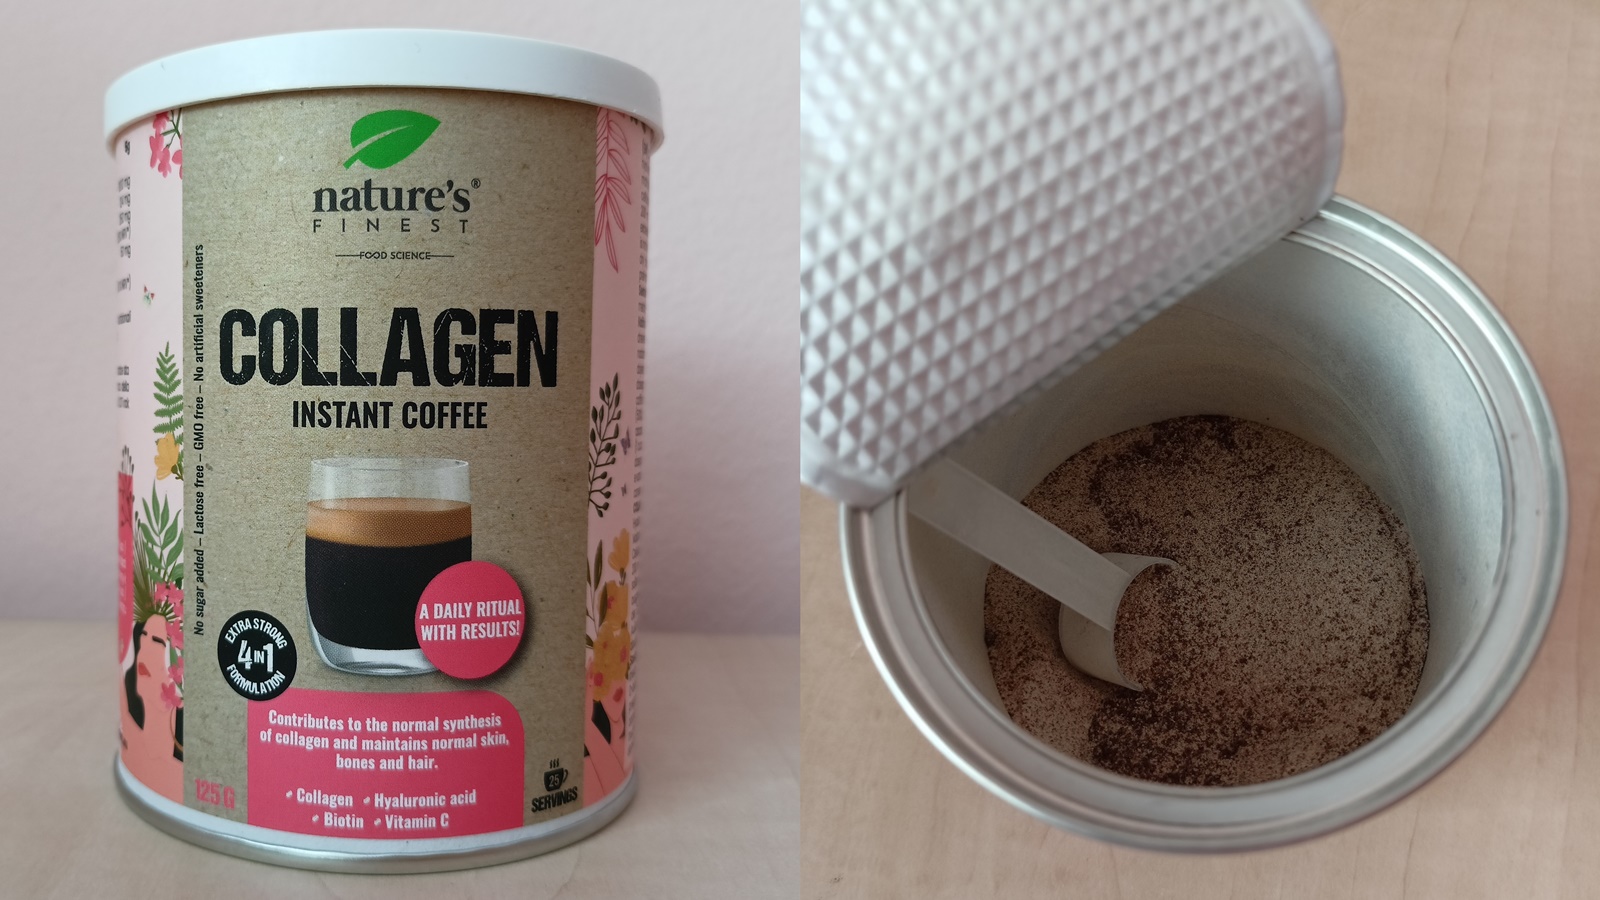 Review: Collagen Instant Coffee by Nature’s Finest